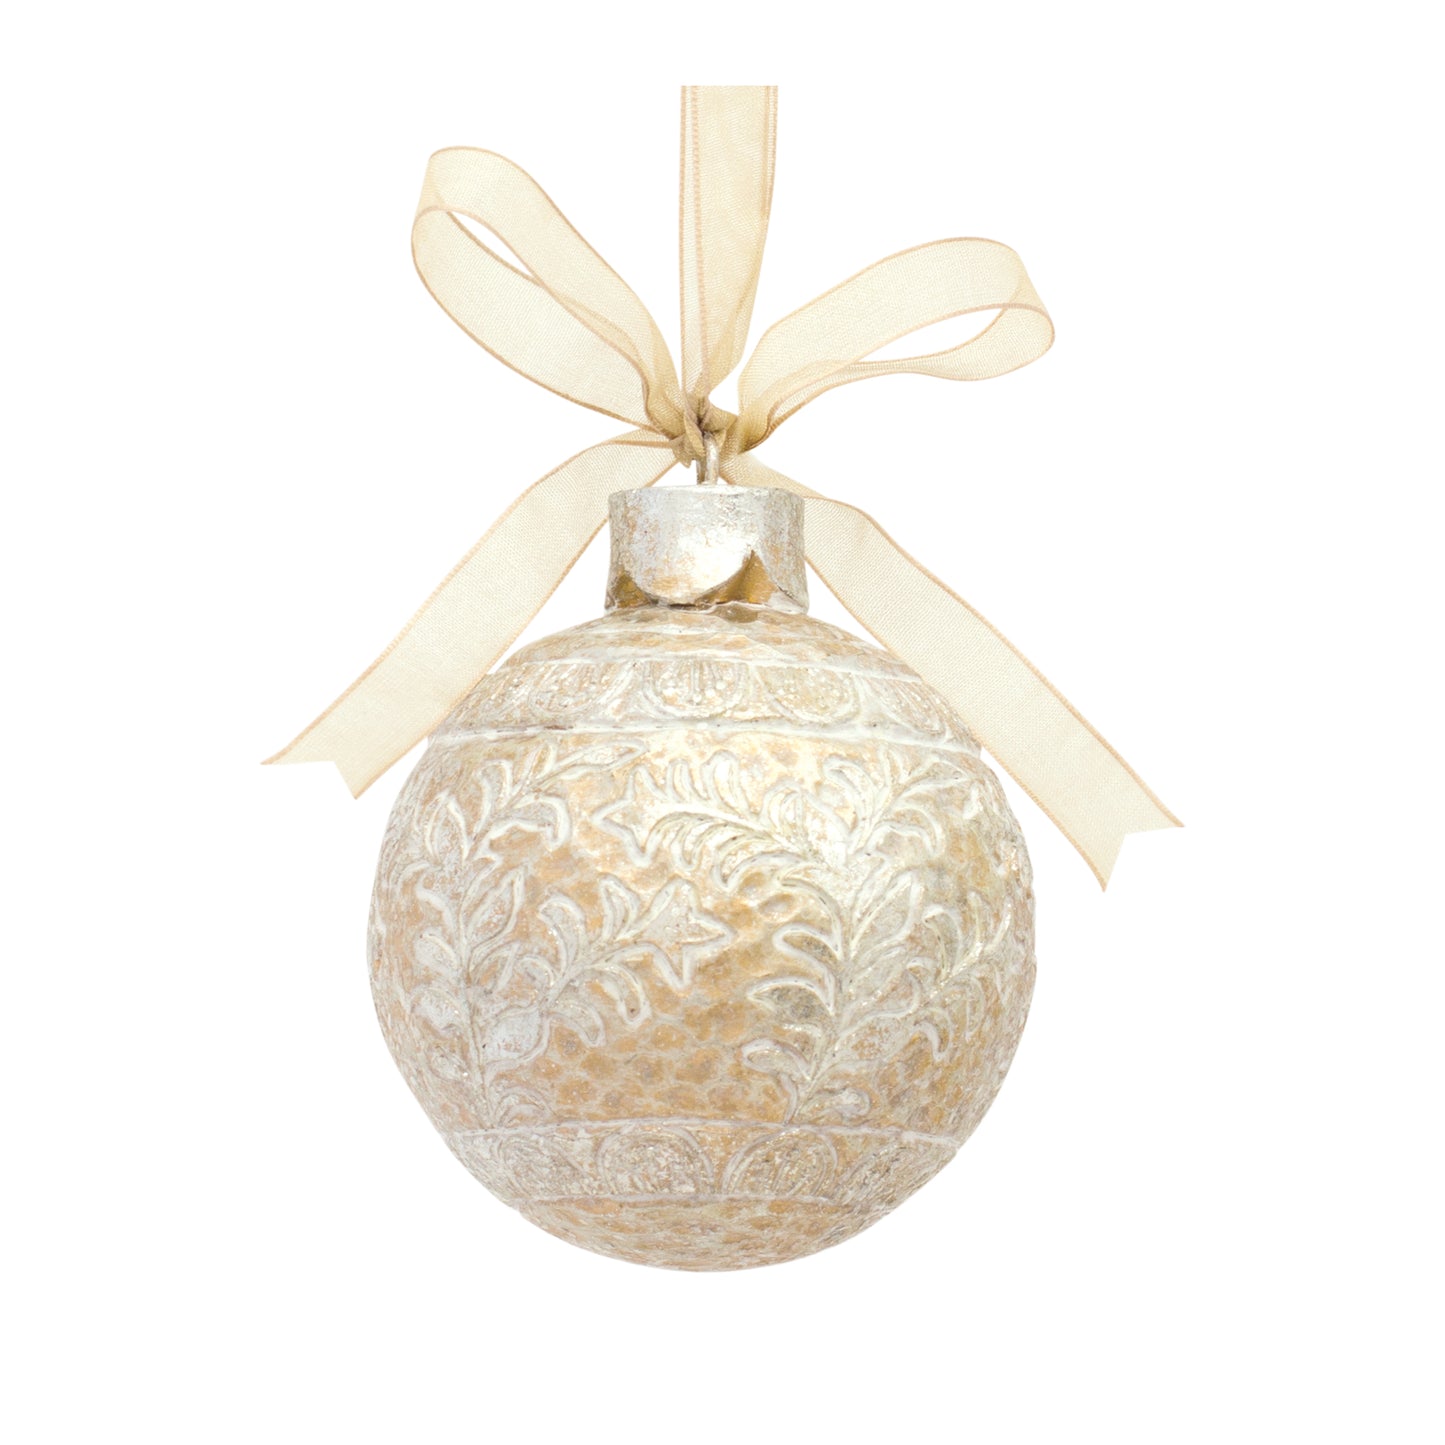 Gold And Silver Ornament Set Of 12